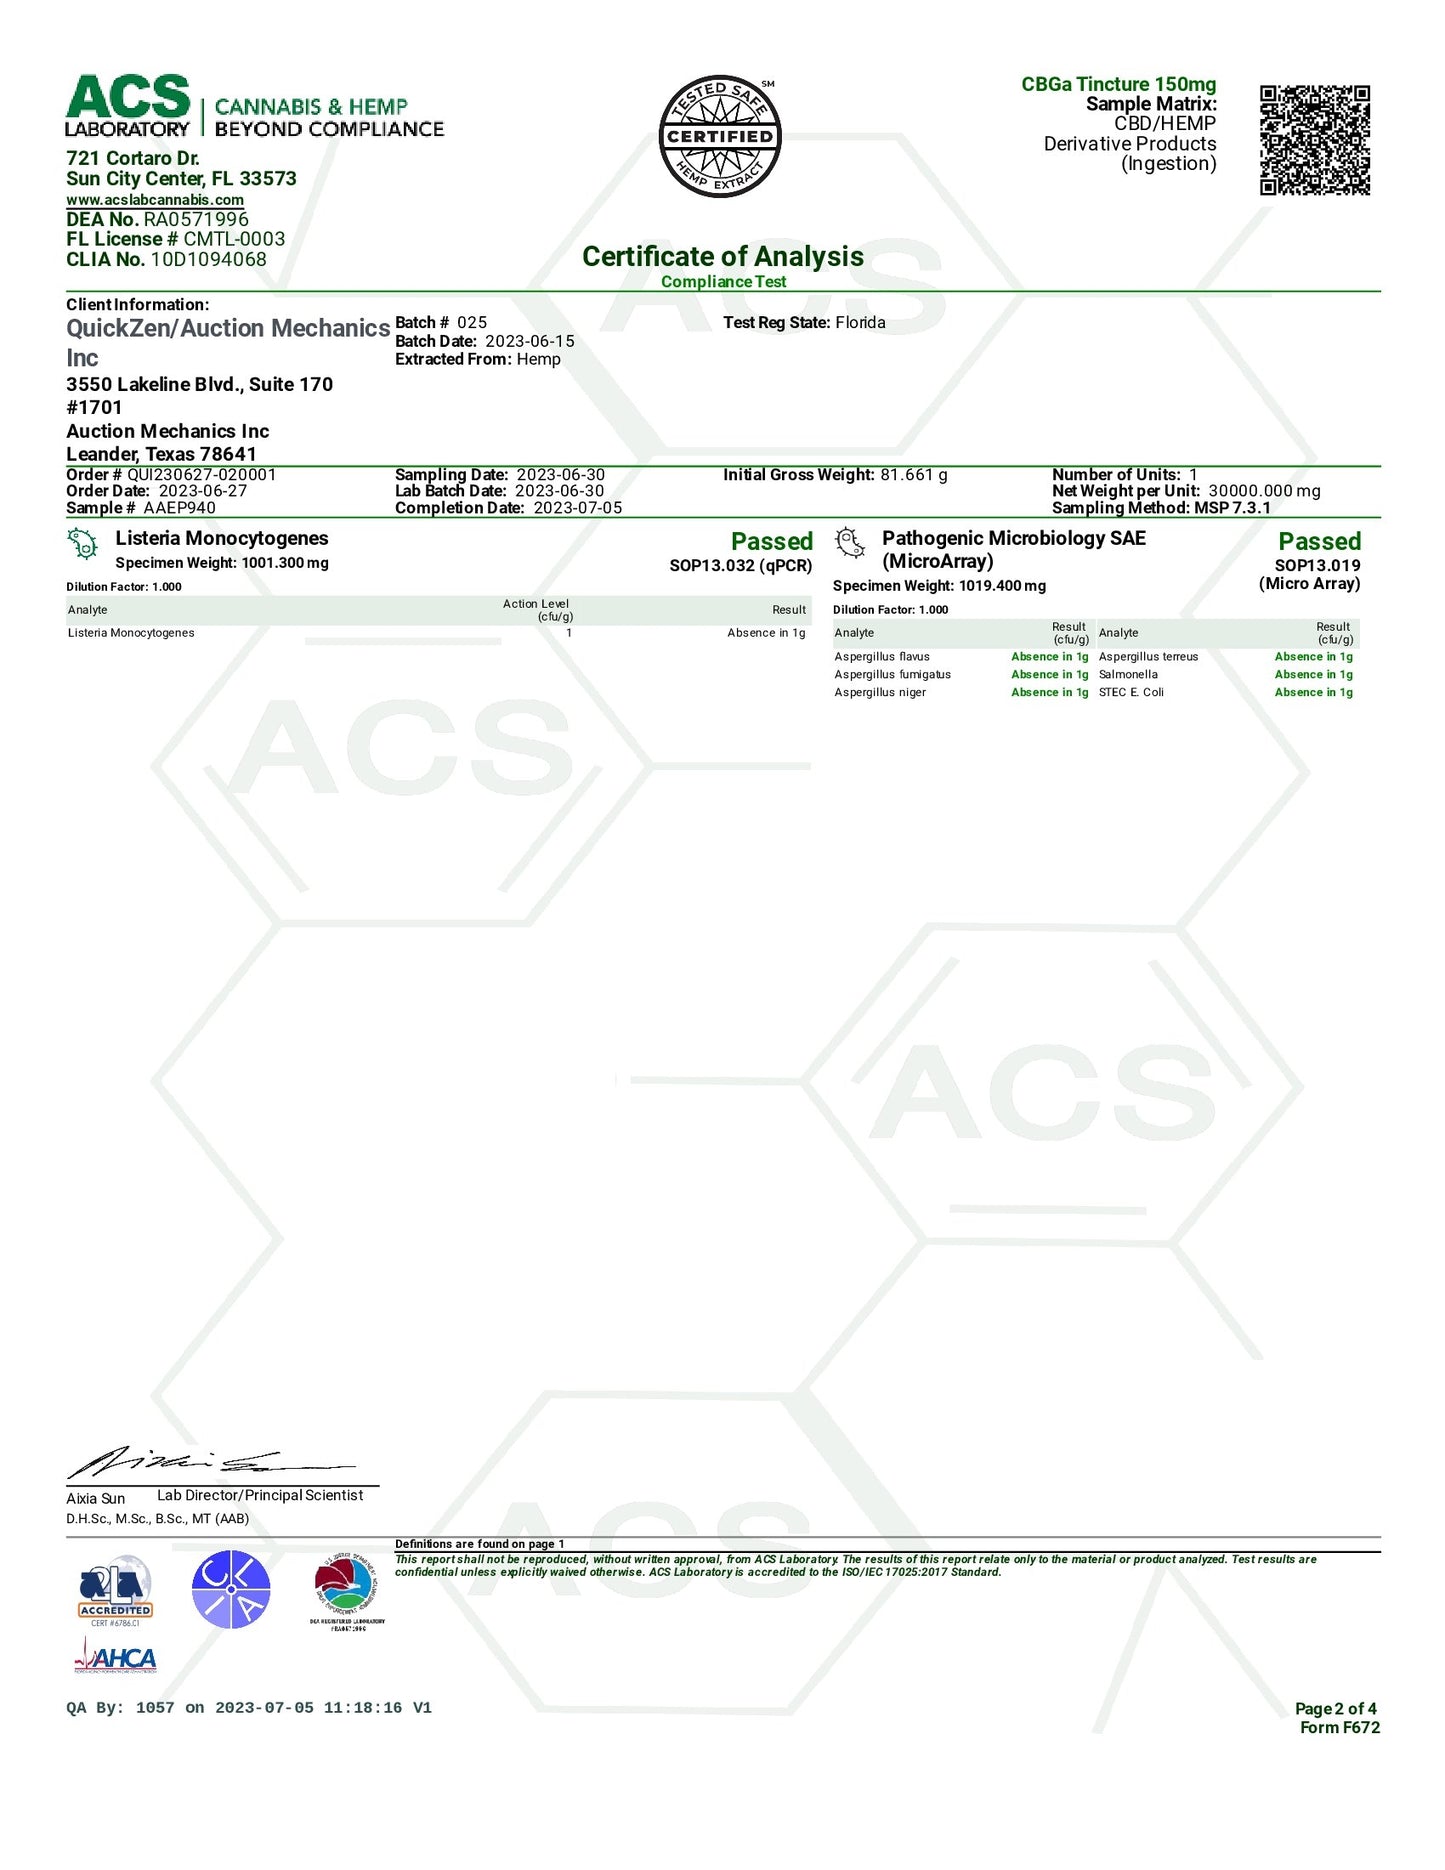 Lot 025 page two, pathogens and listeria test results. All absent or none found. Tested and passed by ACS Laboratories certified full panel tests.